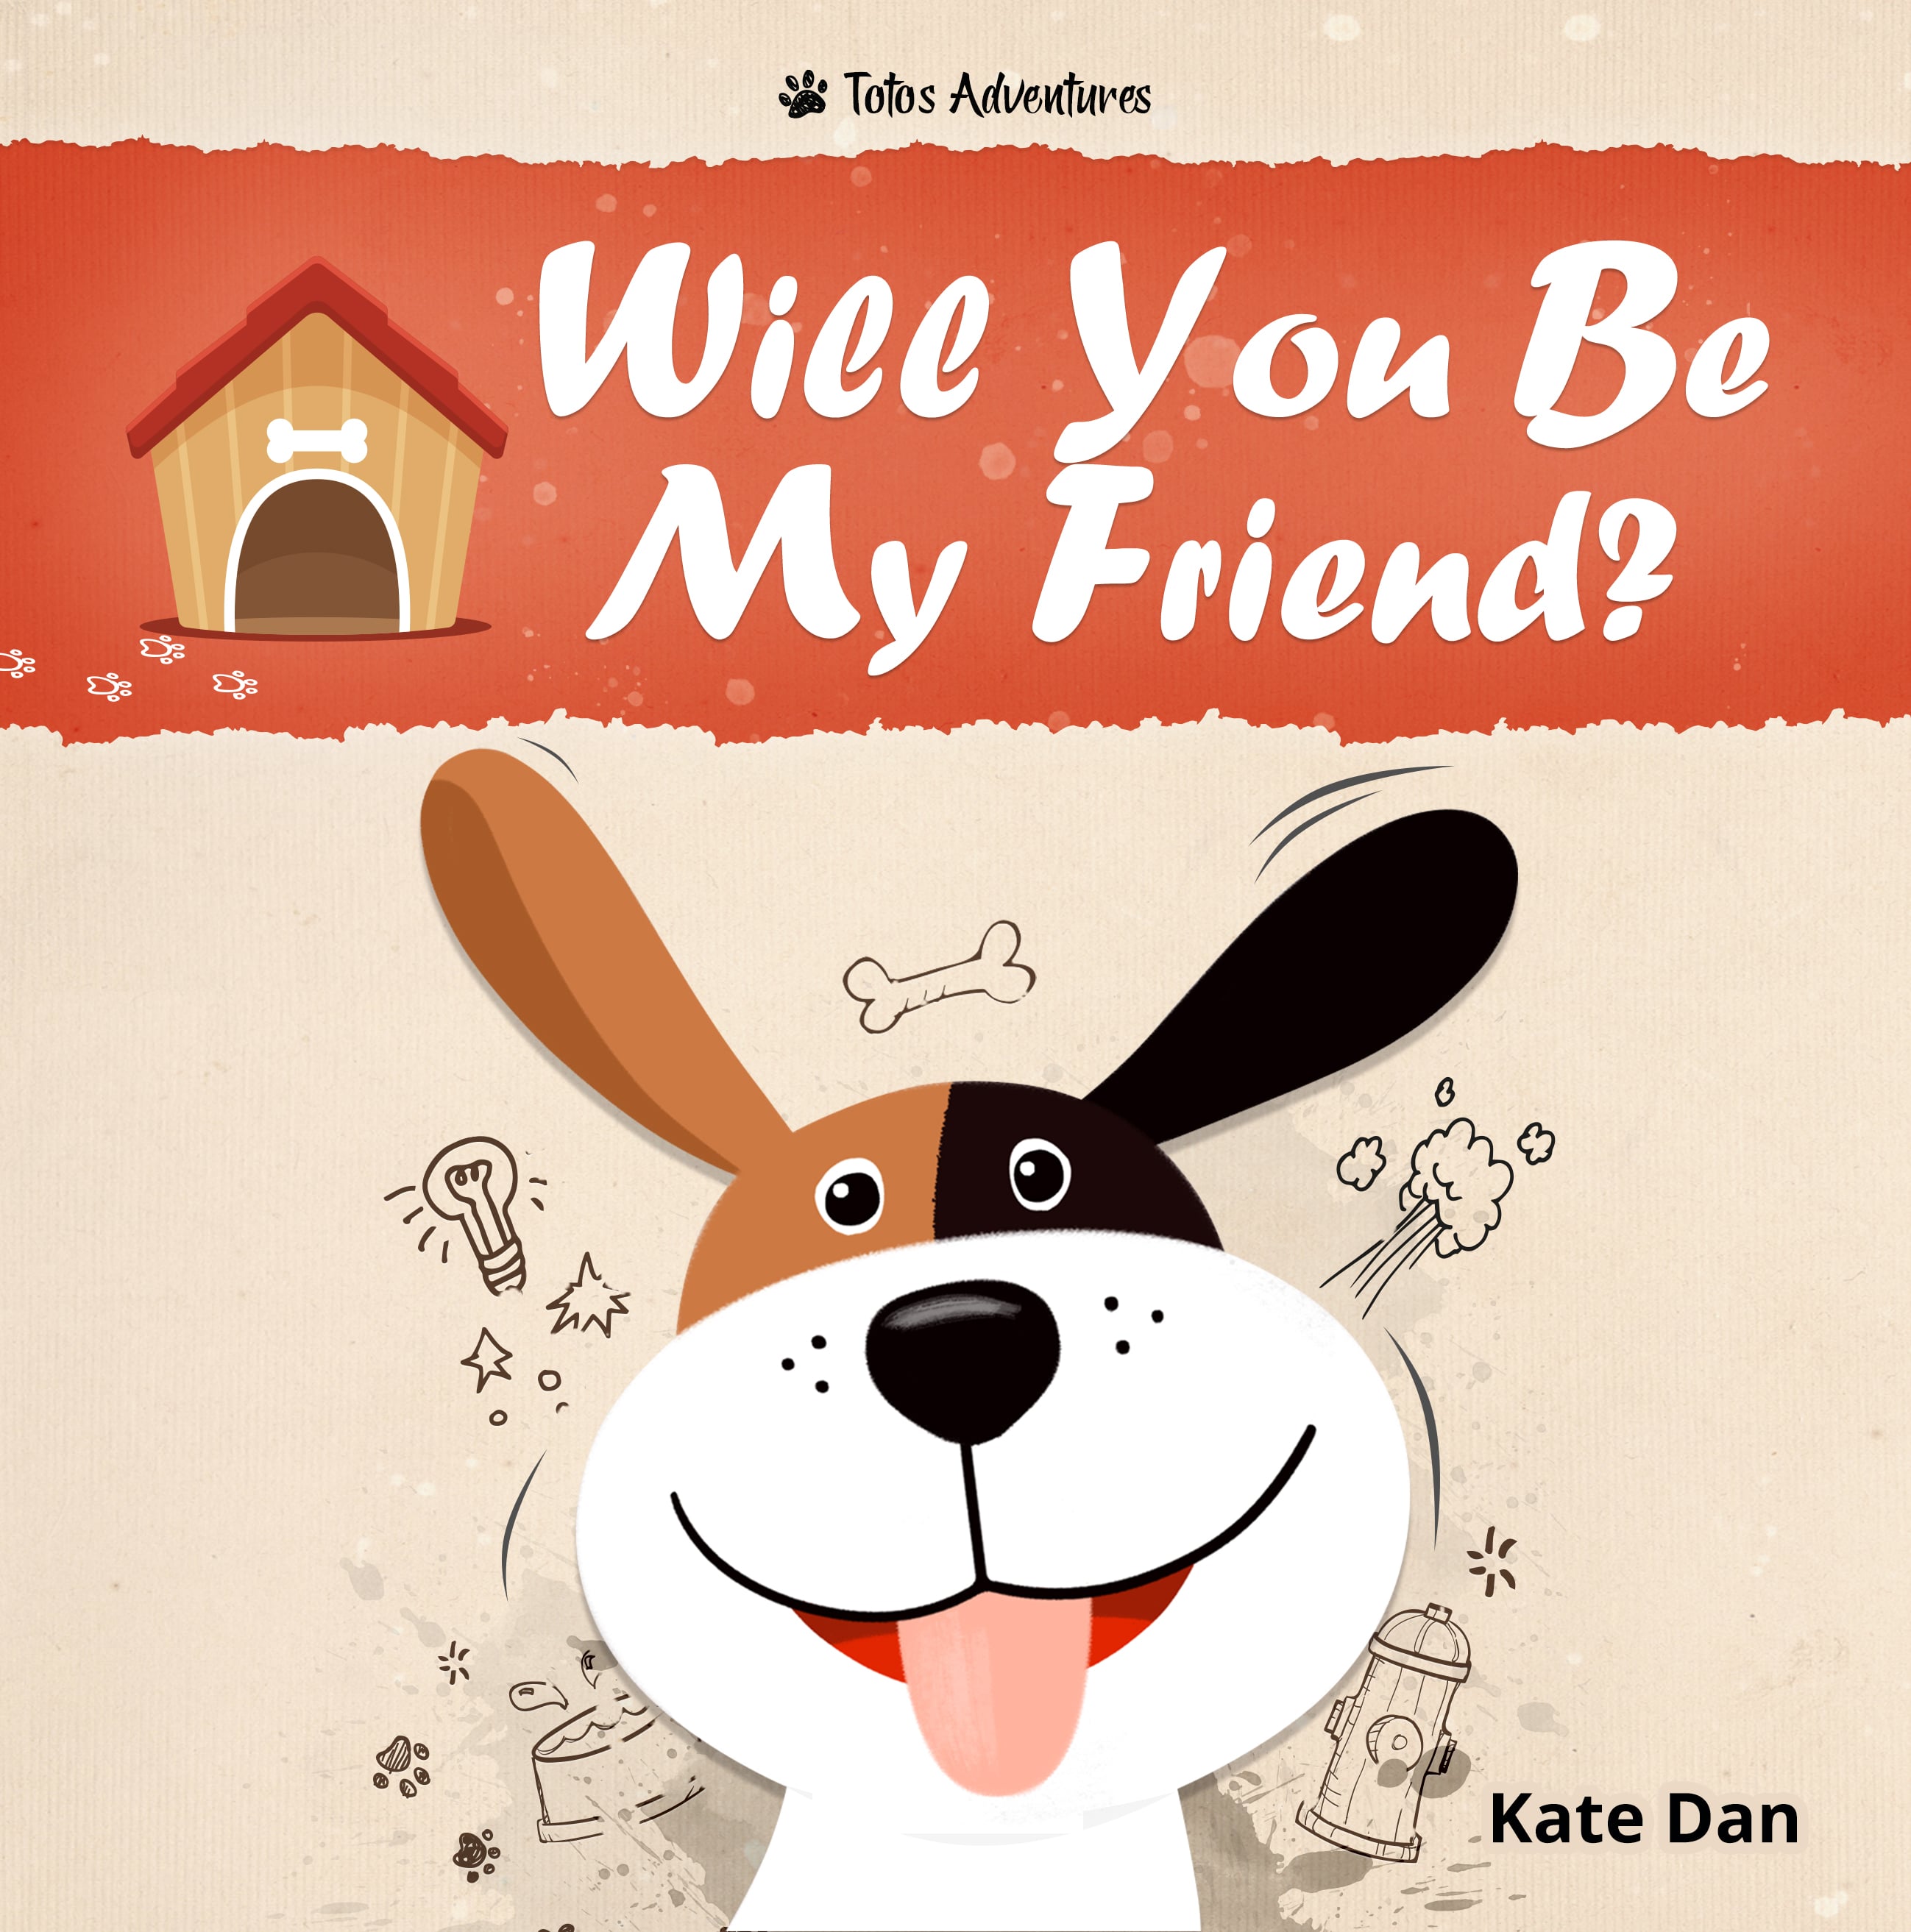 FREE: Will You Be My Friend? : A Kid’s Self Love and Self-esteem Book by Kate Dan